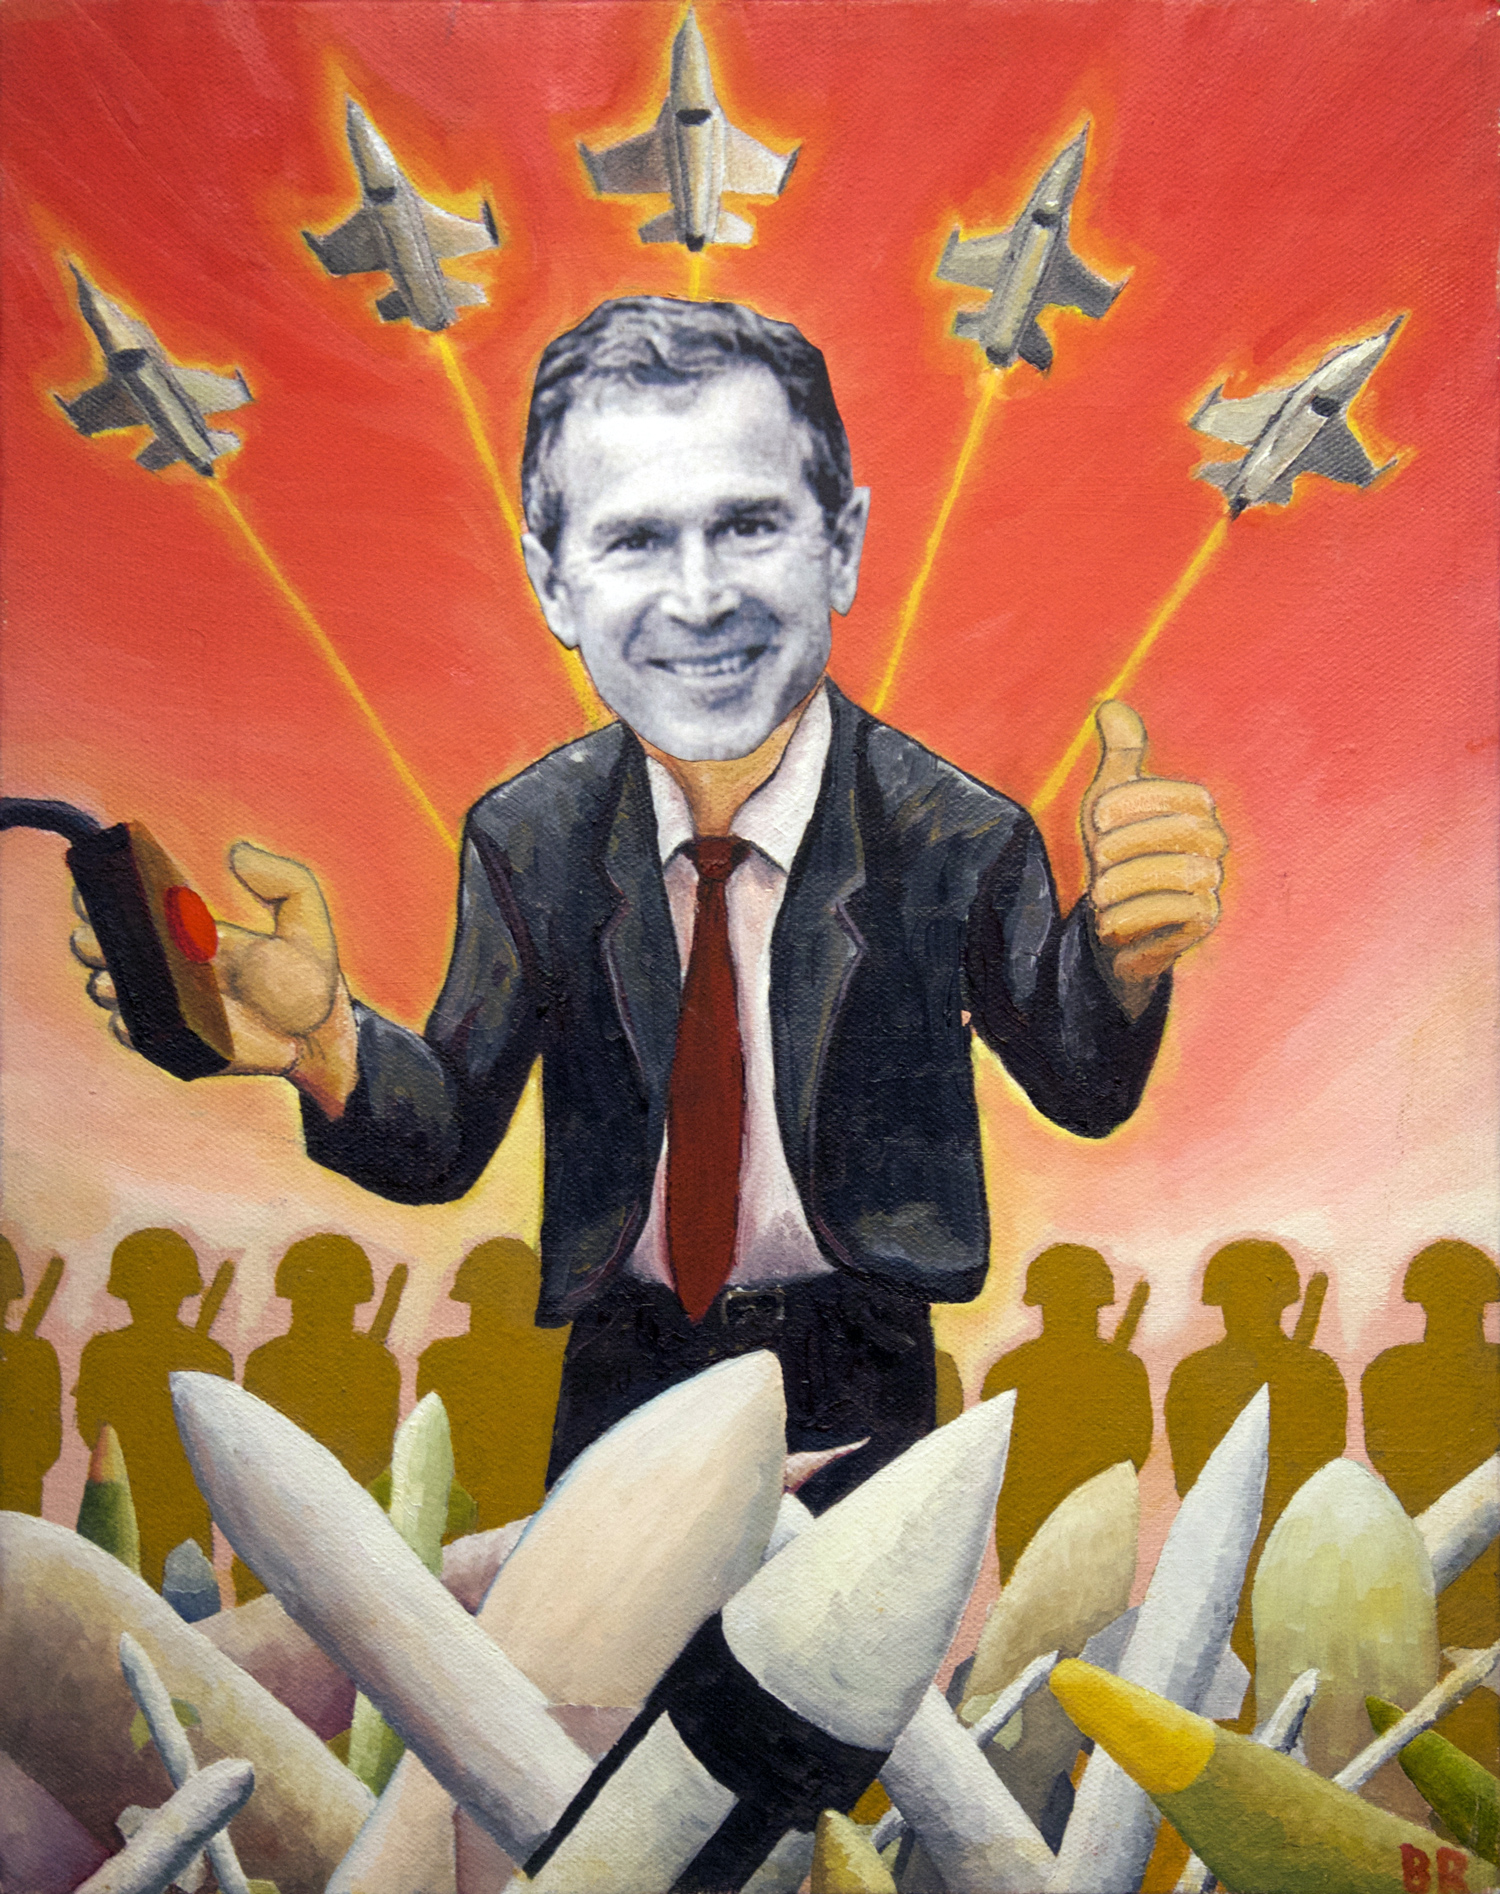 No Guns No Glory oil painting (GW Bush political satire), by Billy Reiter